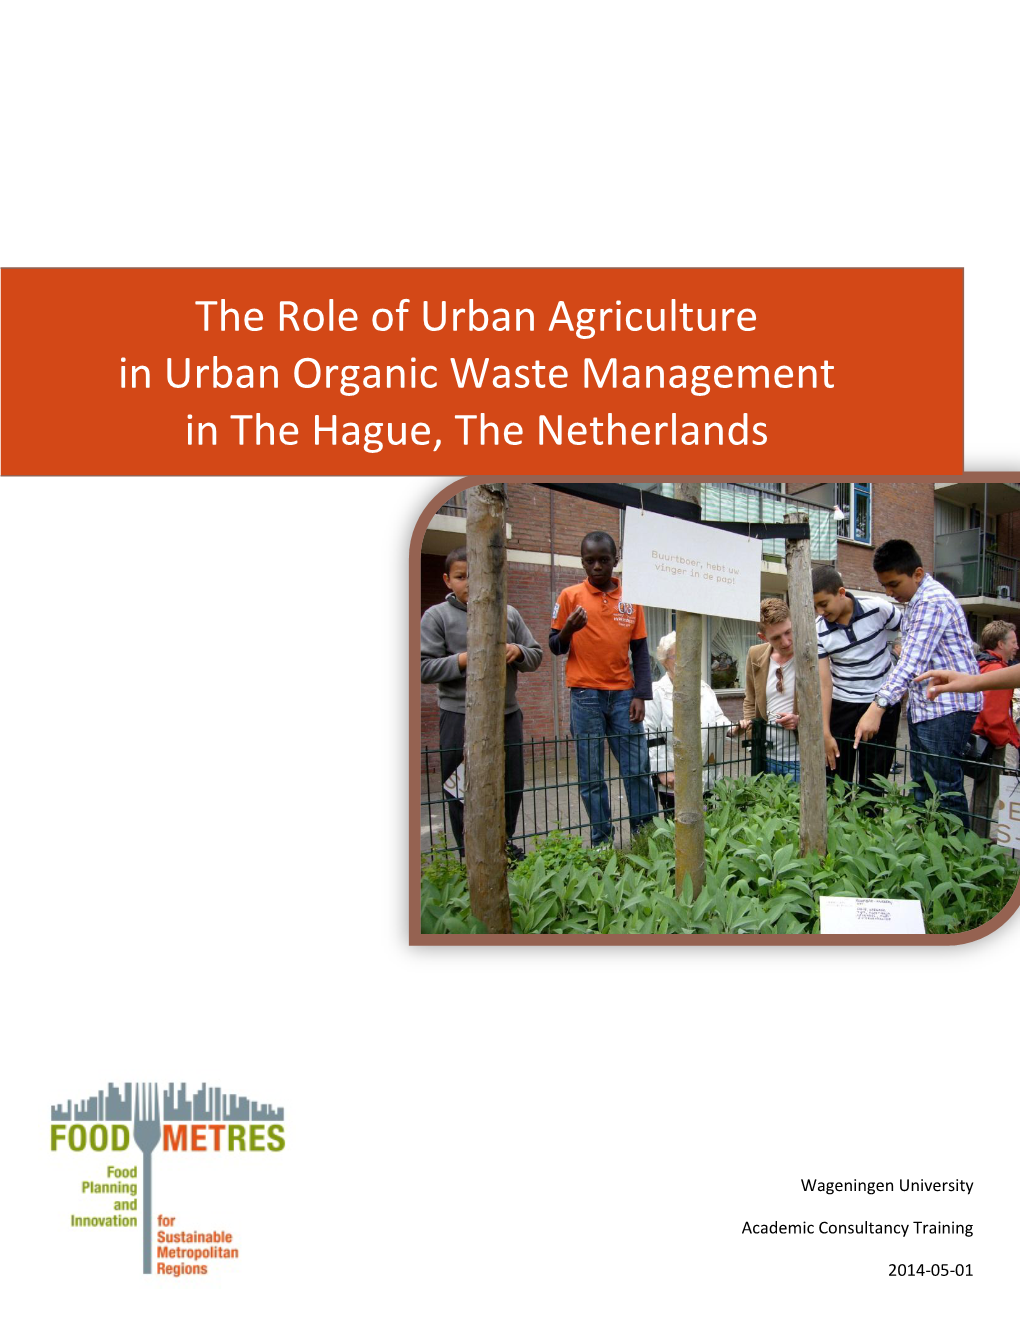 The Role of Urban Agriculture in Urban Organic Waste Management in the Hague, the Netherlands